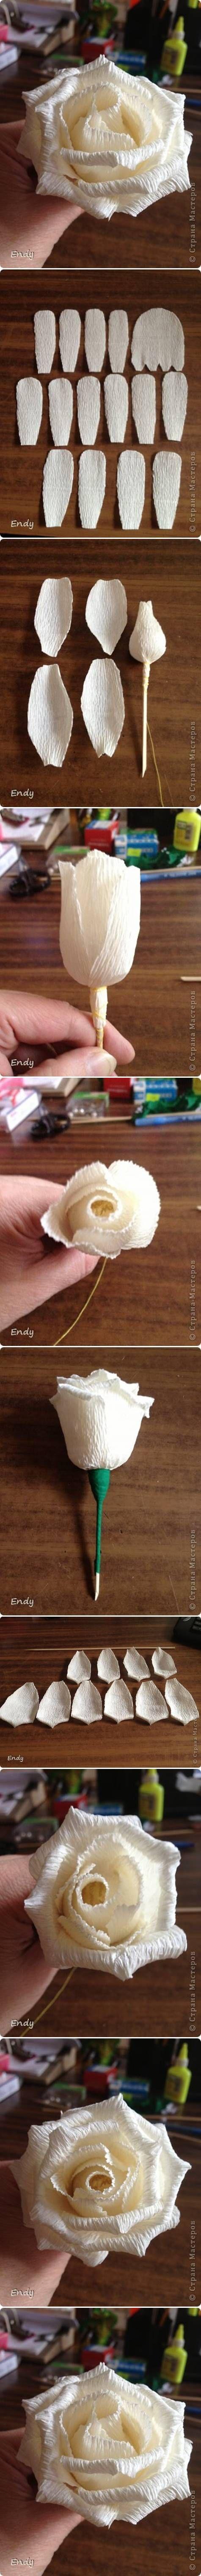 Wedding - DIY Easy Corrugated Paper Rose DIY Projects 